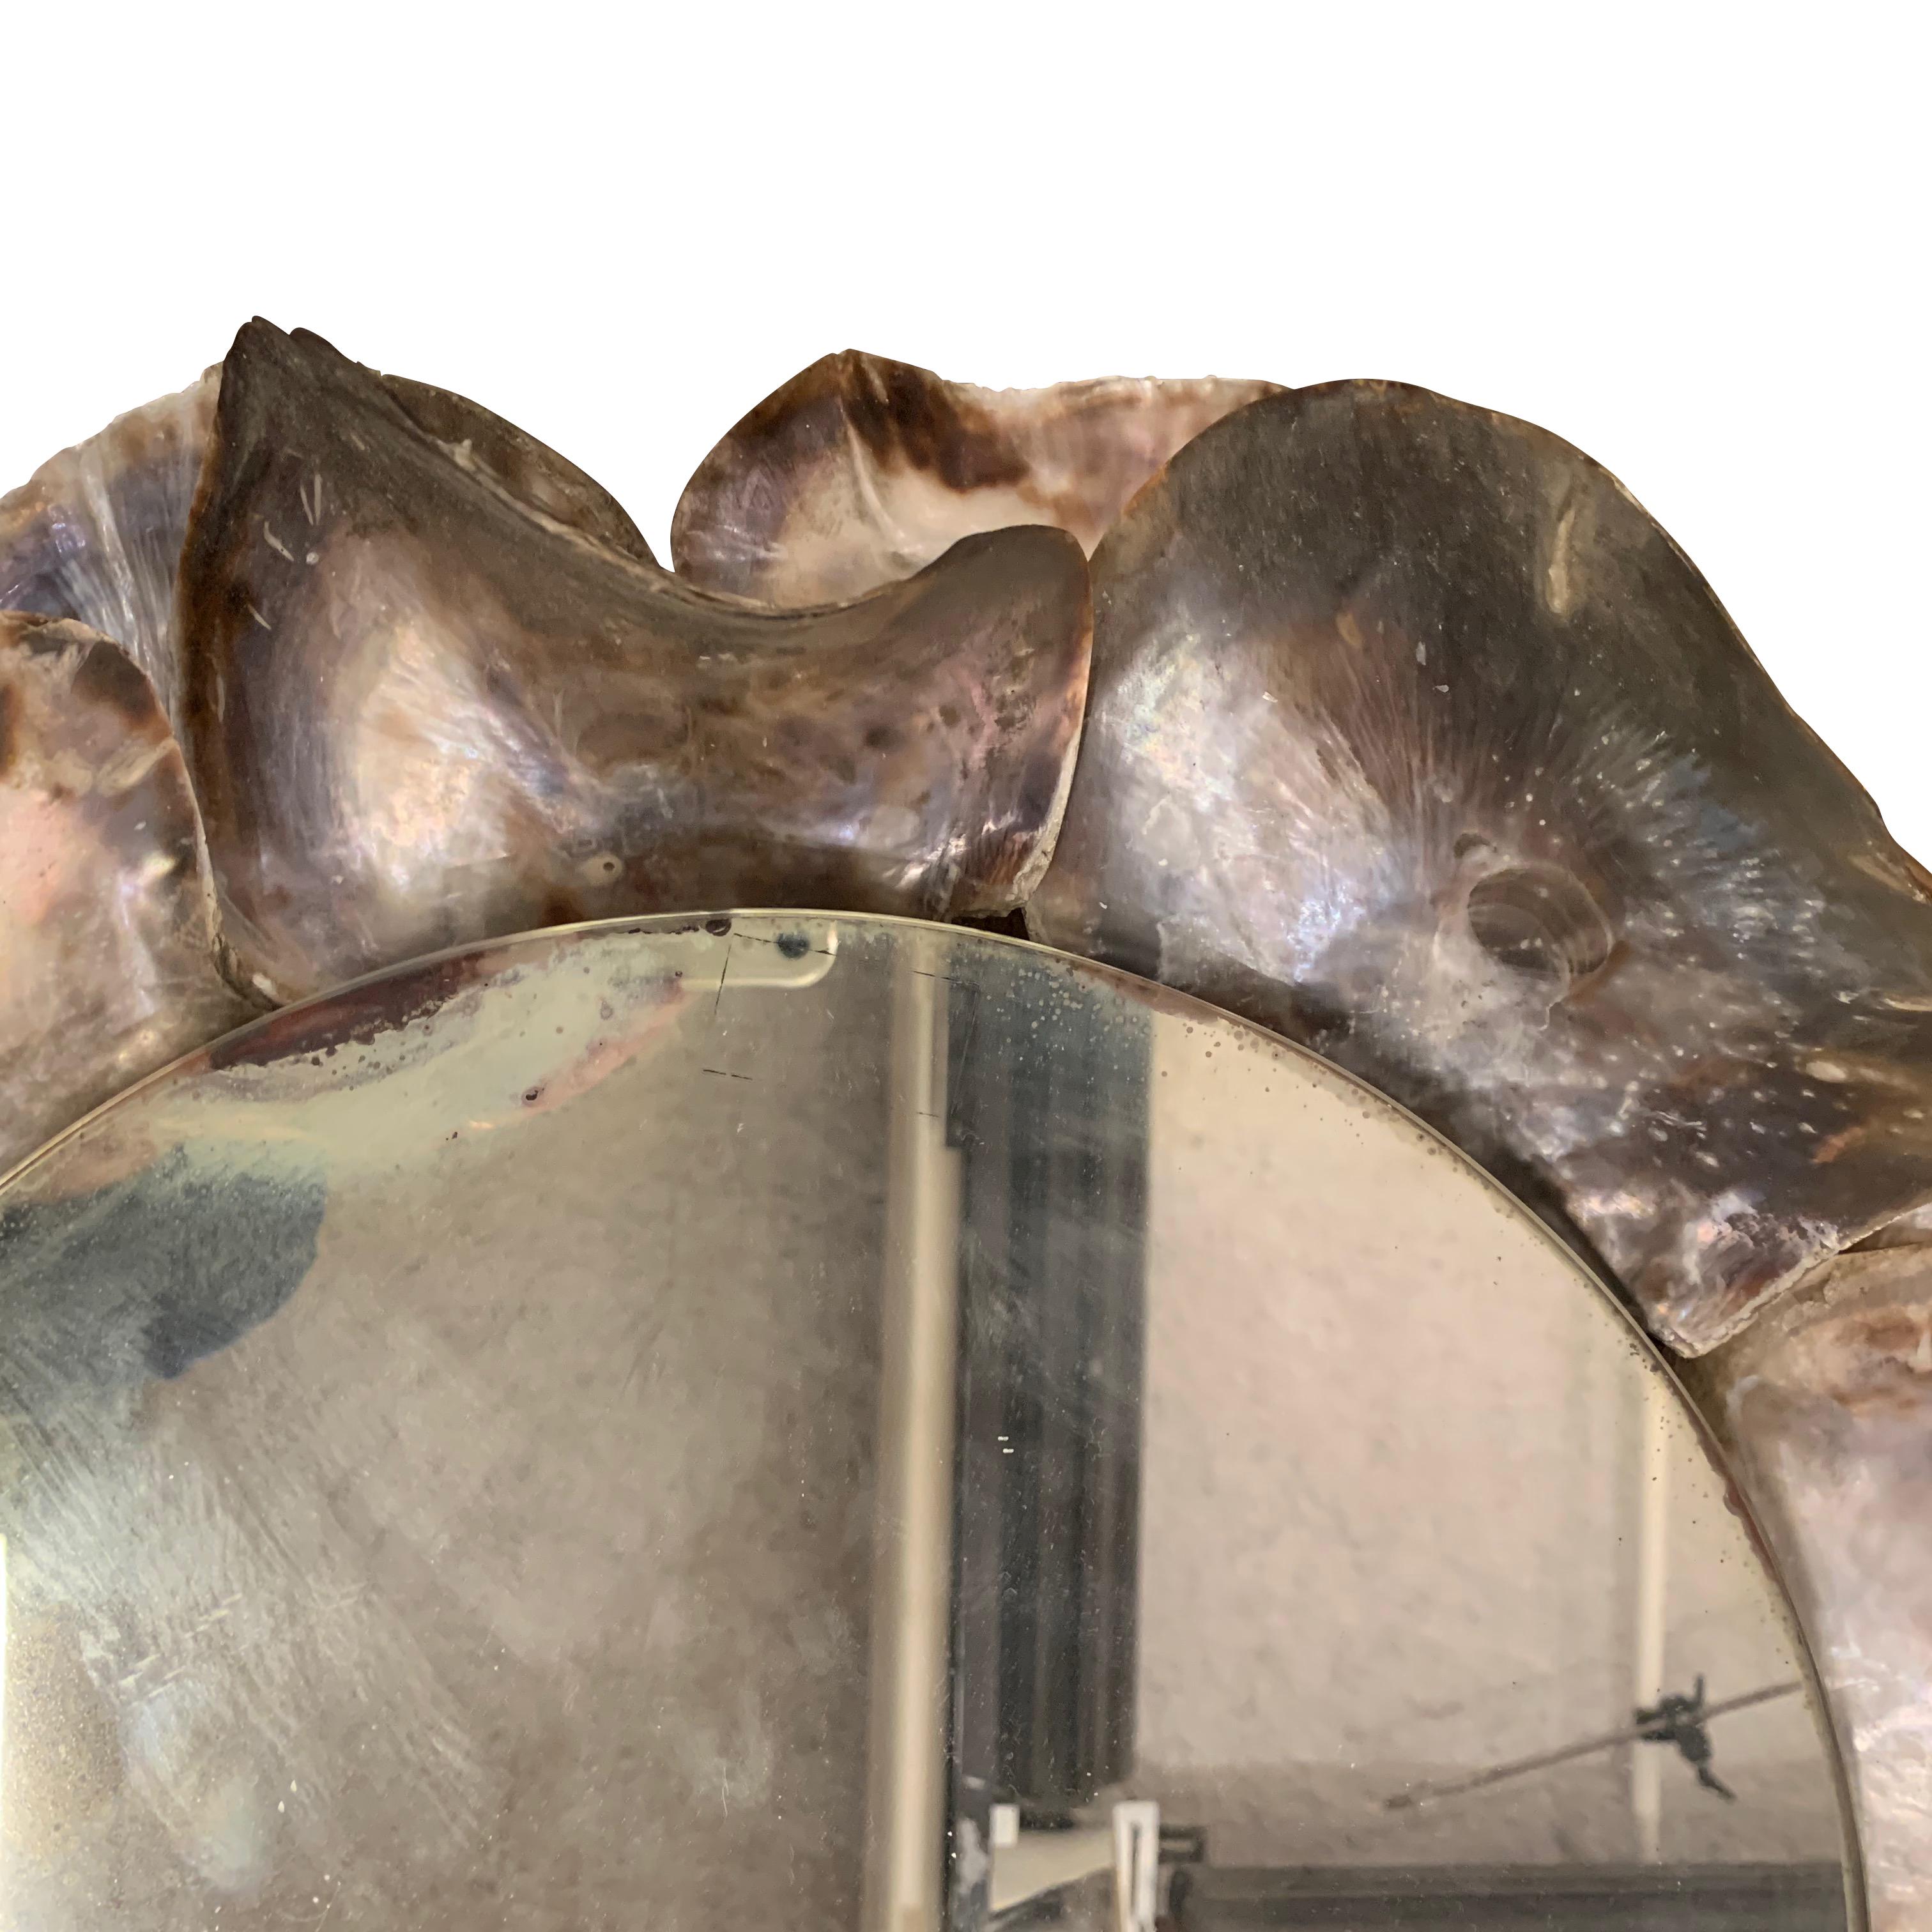 Layers of extra large mother of pearl shells form the frame of this round mirror
Very decorative.
  